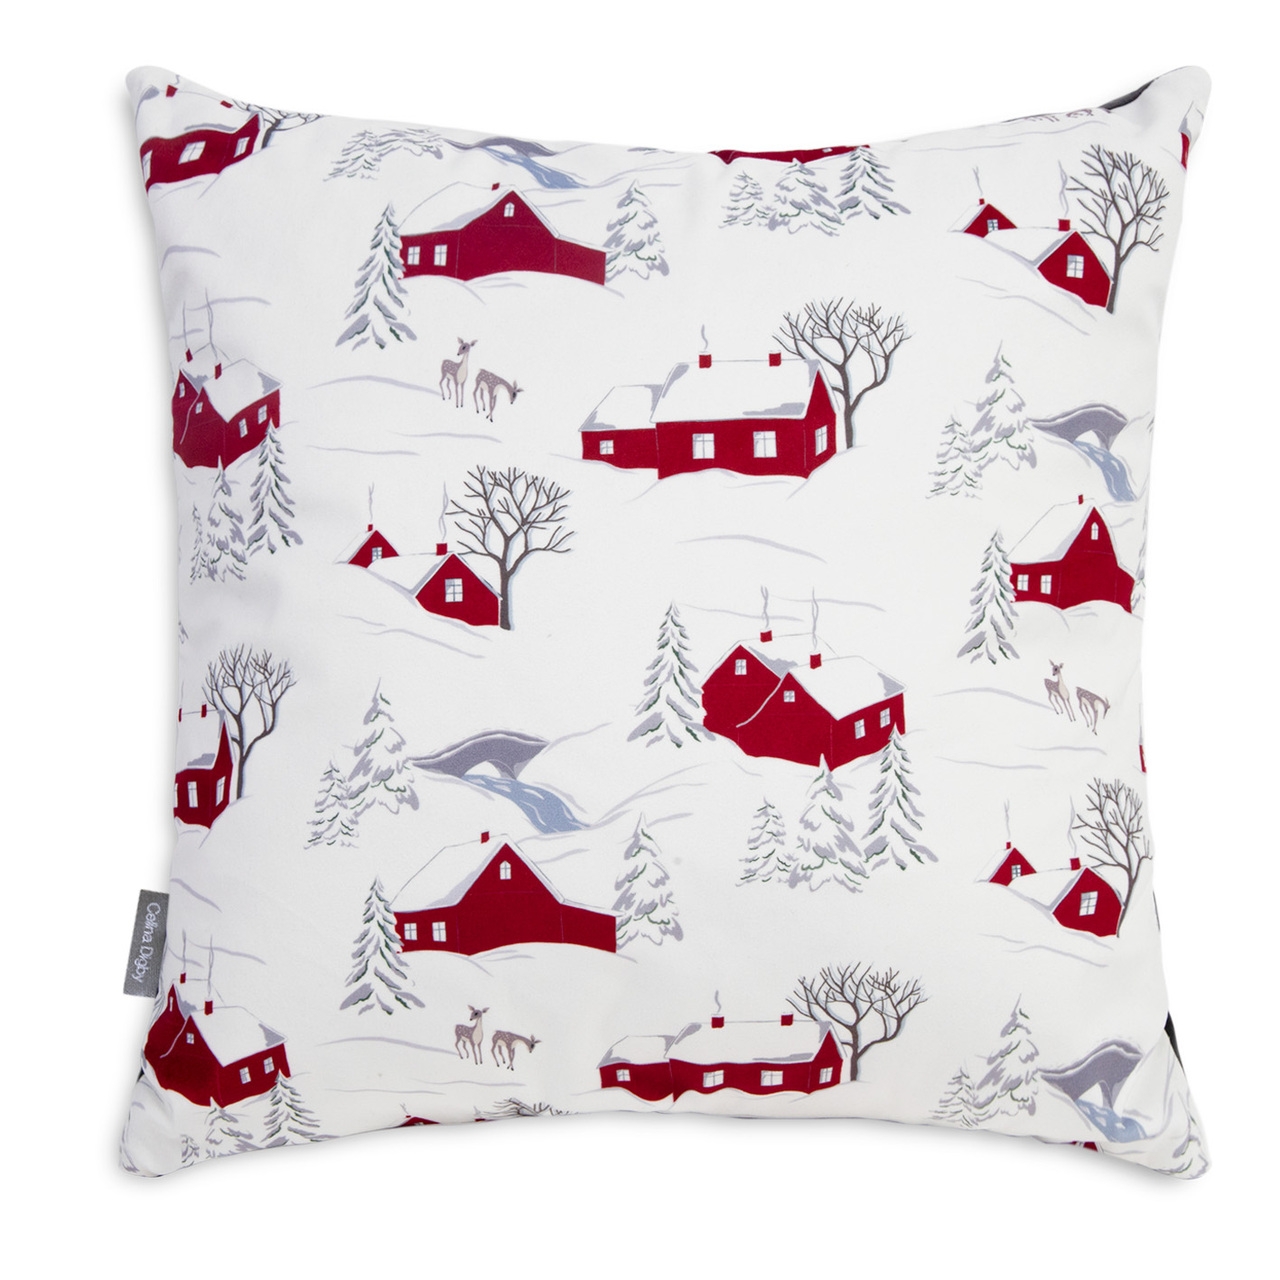 Celina Digby Luxury Christmas Velvet Cushion – Winter Village Available in 2 Sizes Standard (45cm) Feather Filling